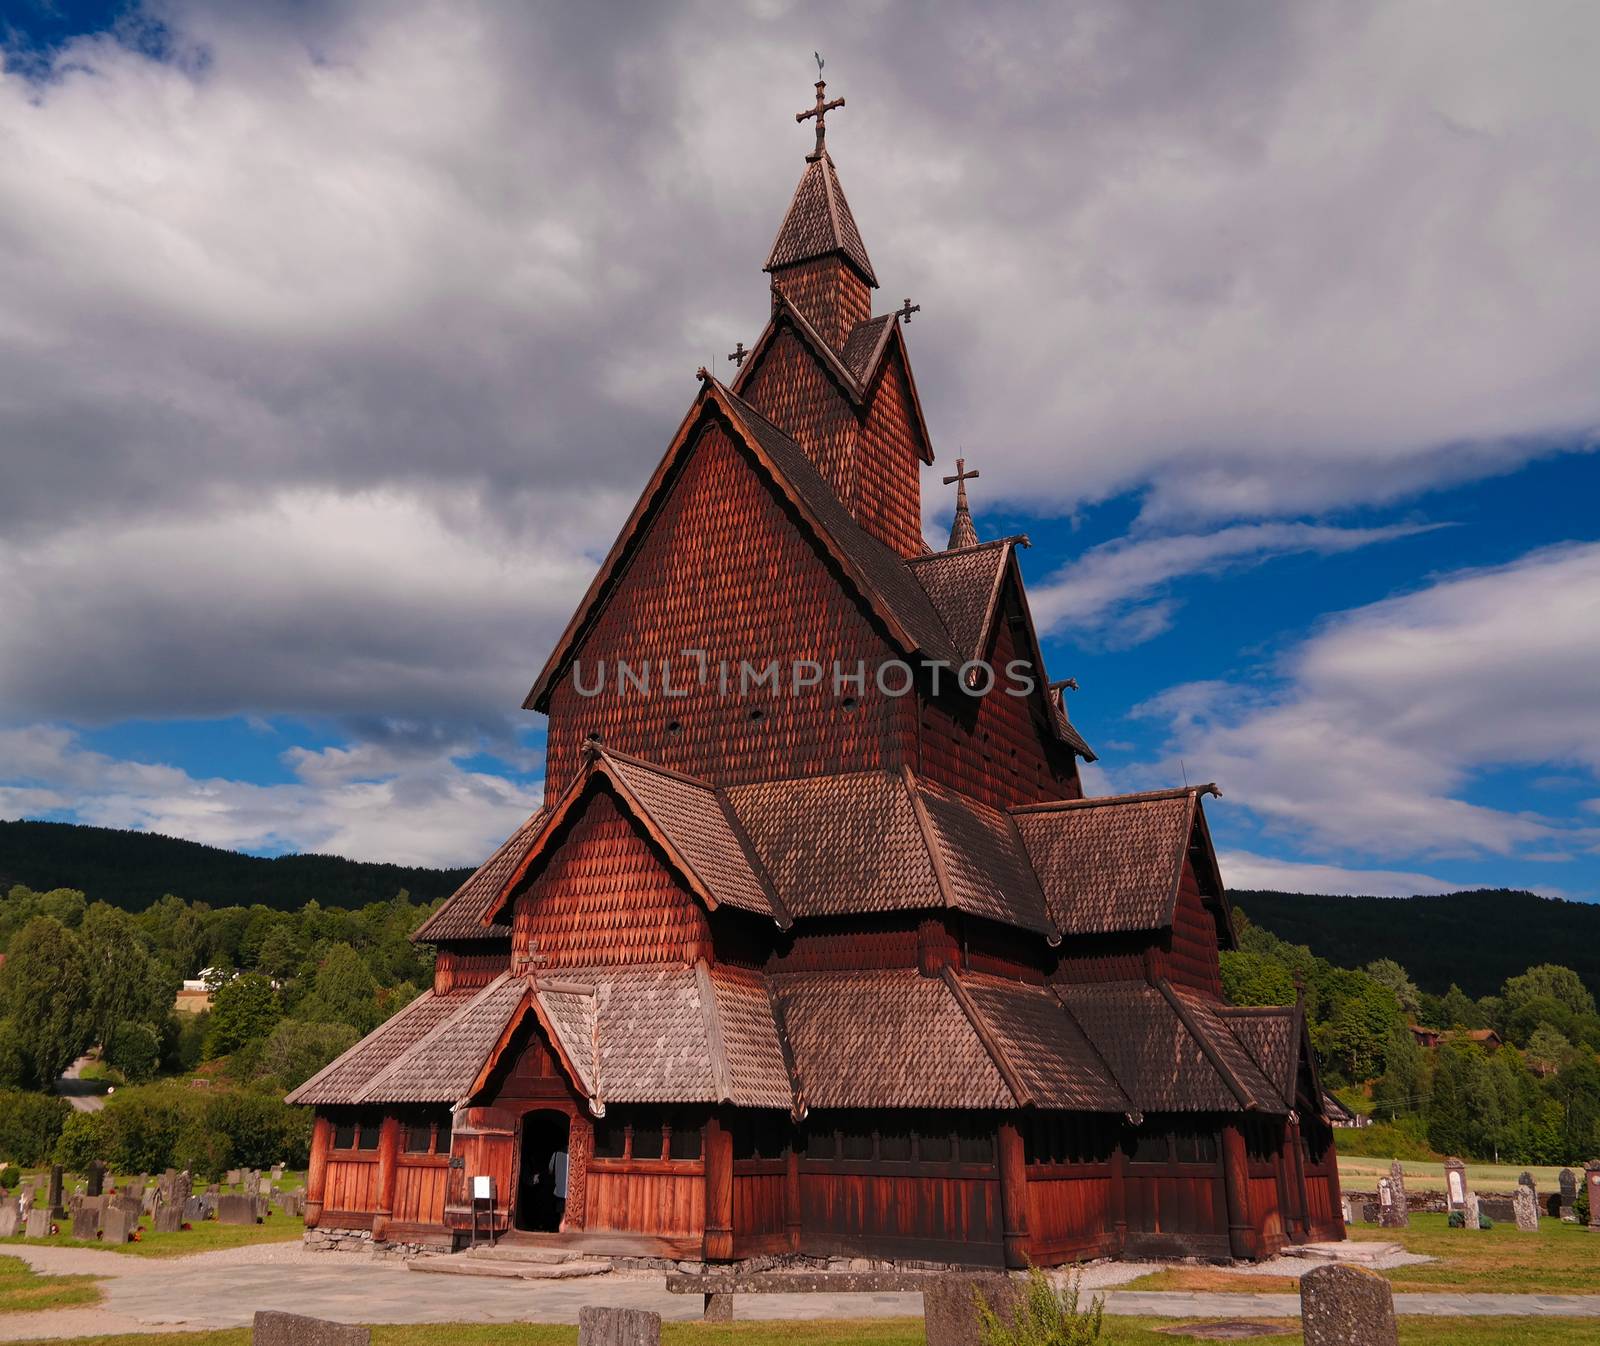 Heddal Stave Church, Notodden municipality, Norway by homocosmicos